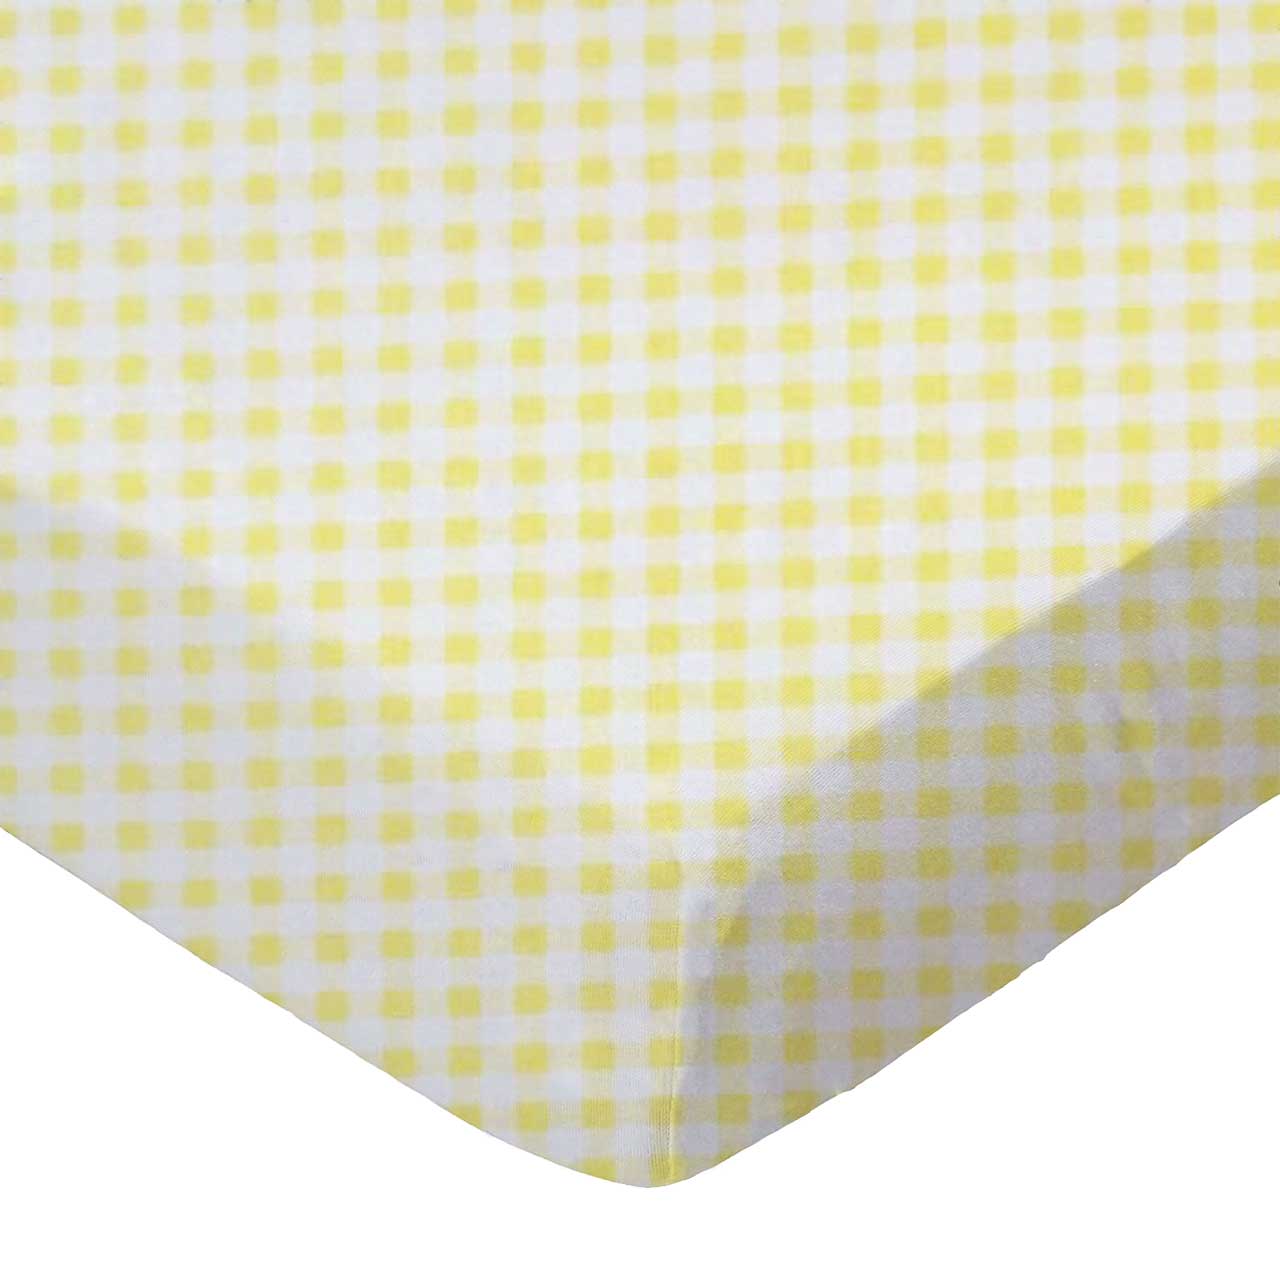 SheetWorld Fitted 100% Cotton Jersey Pack N Play Sheet Fits Graco Square Play Yard 36 x 36, Yellow Gingham Jersey - image 1 of 1